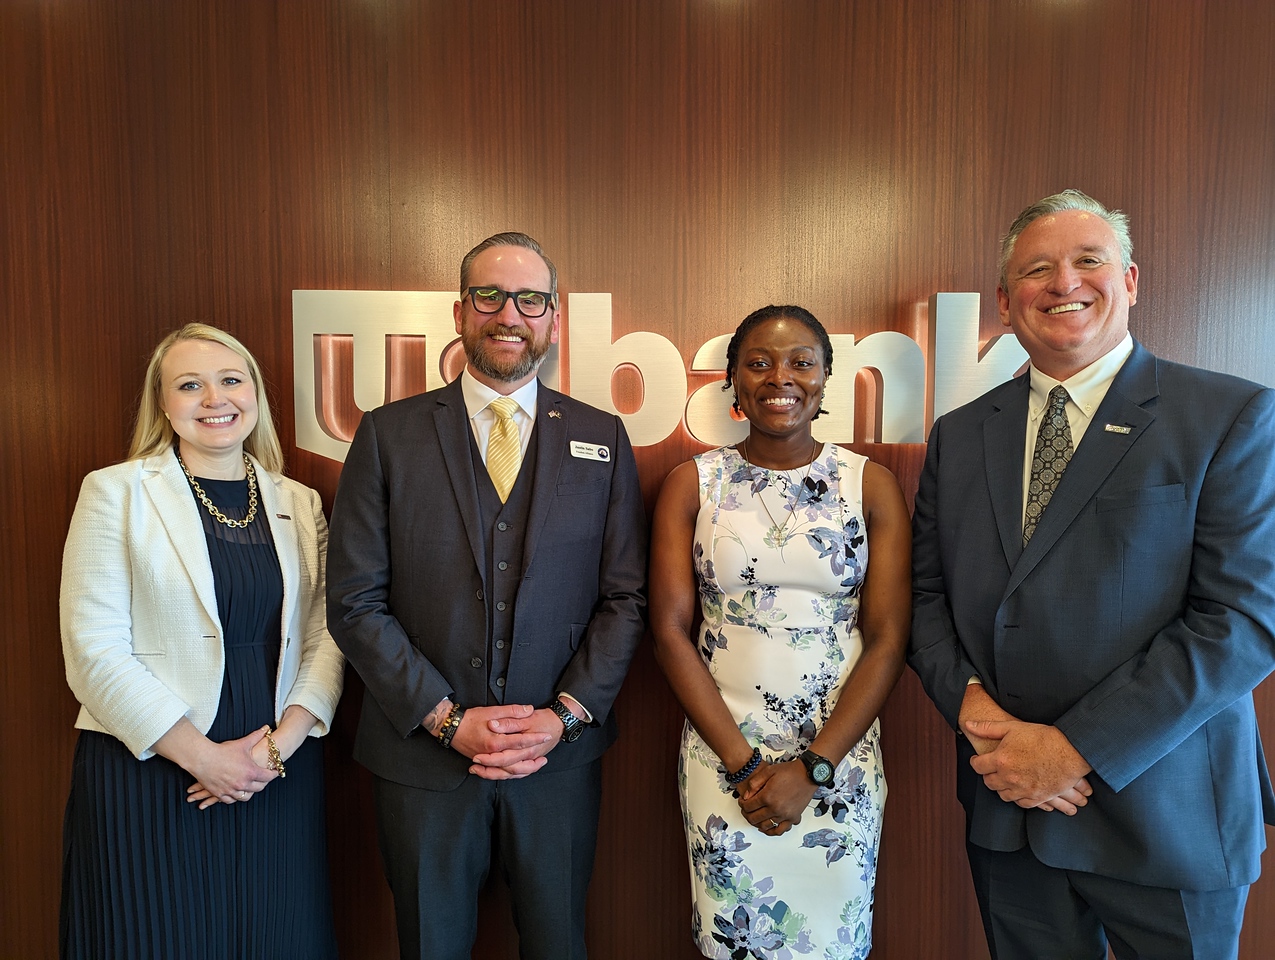 Kiki Patterson with representatives from U.S. Bank standing in front of a sign that reads "US Bank"